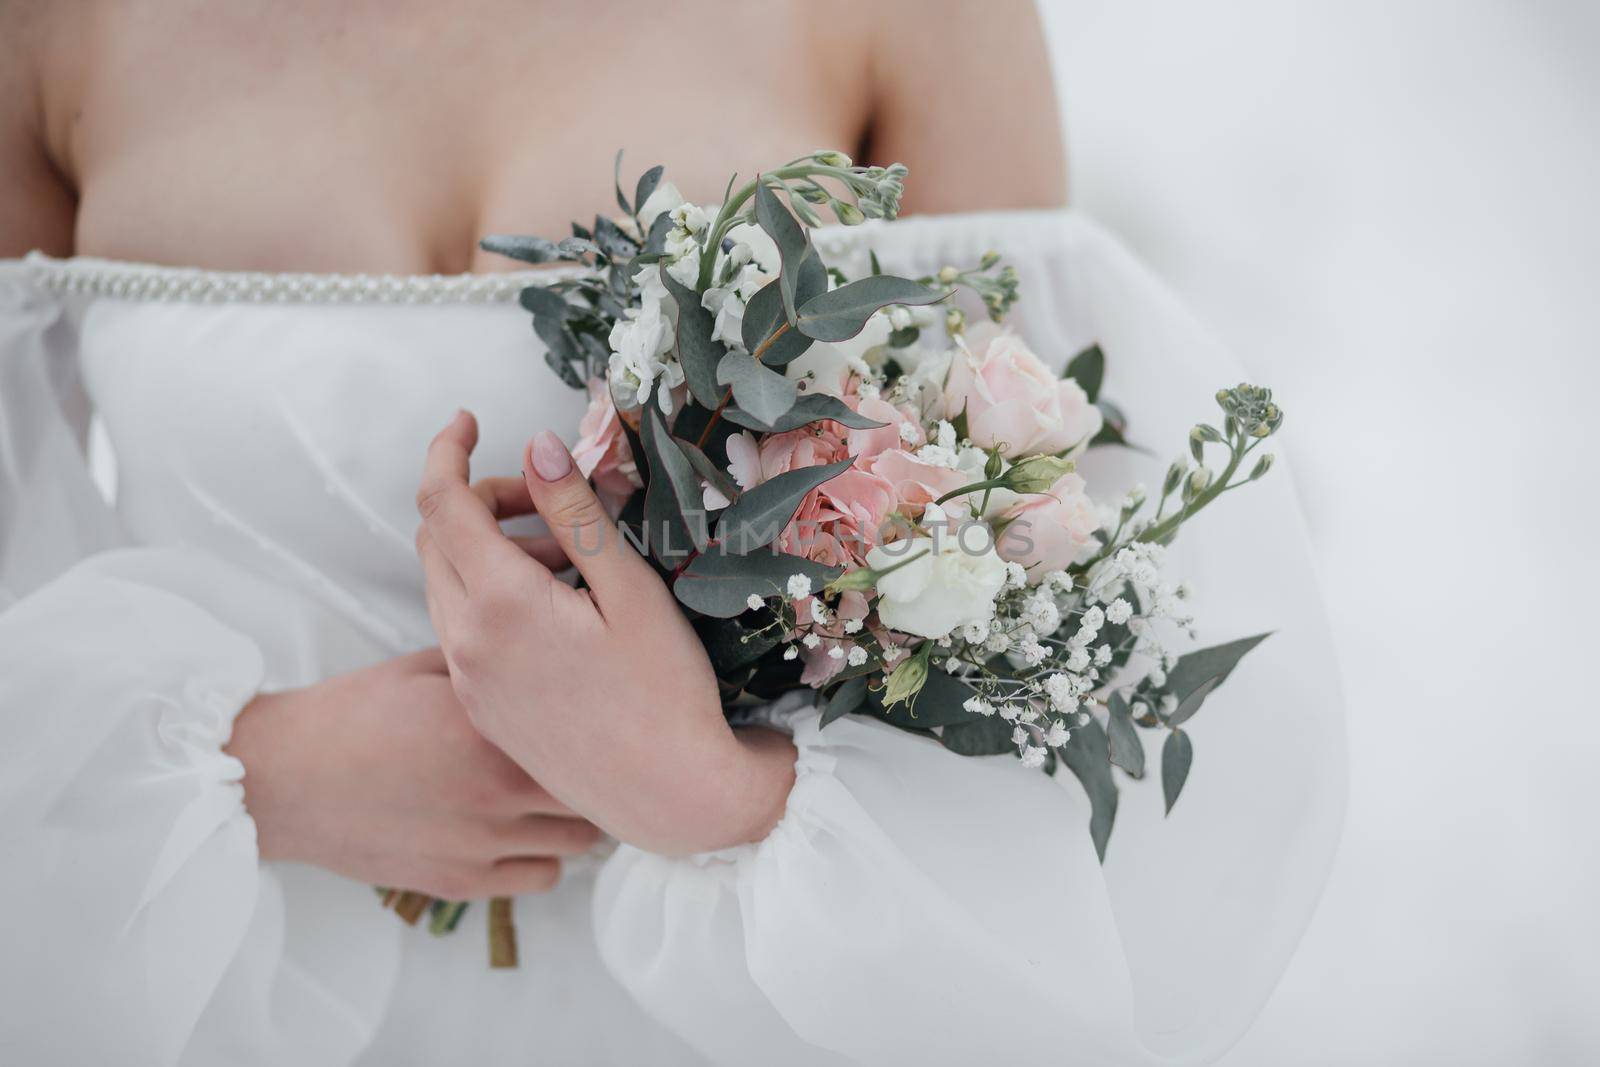 Wedding bouquet in the hands of the bride.